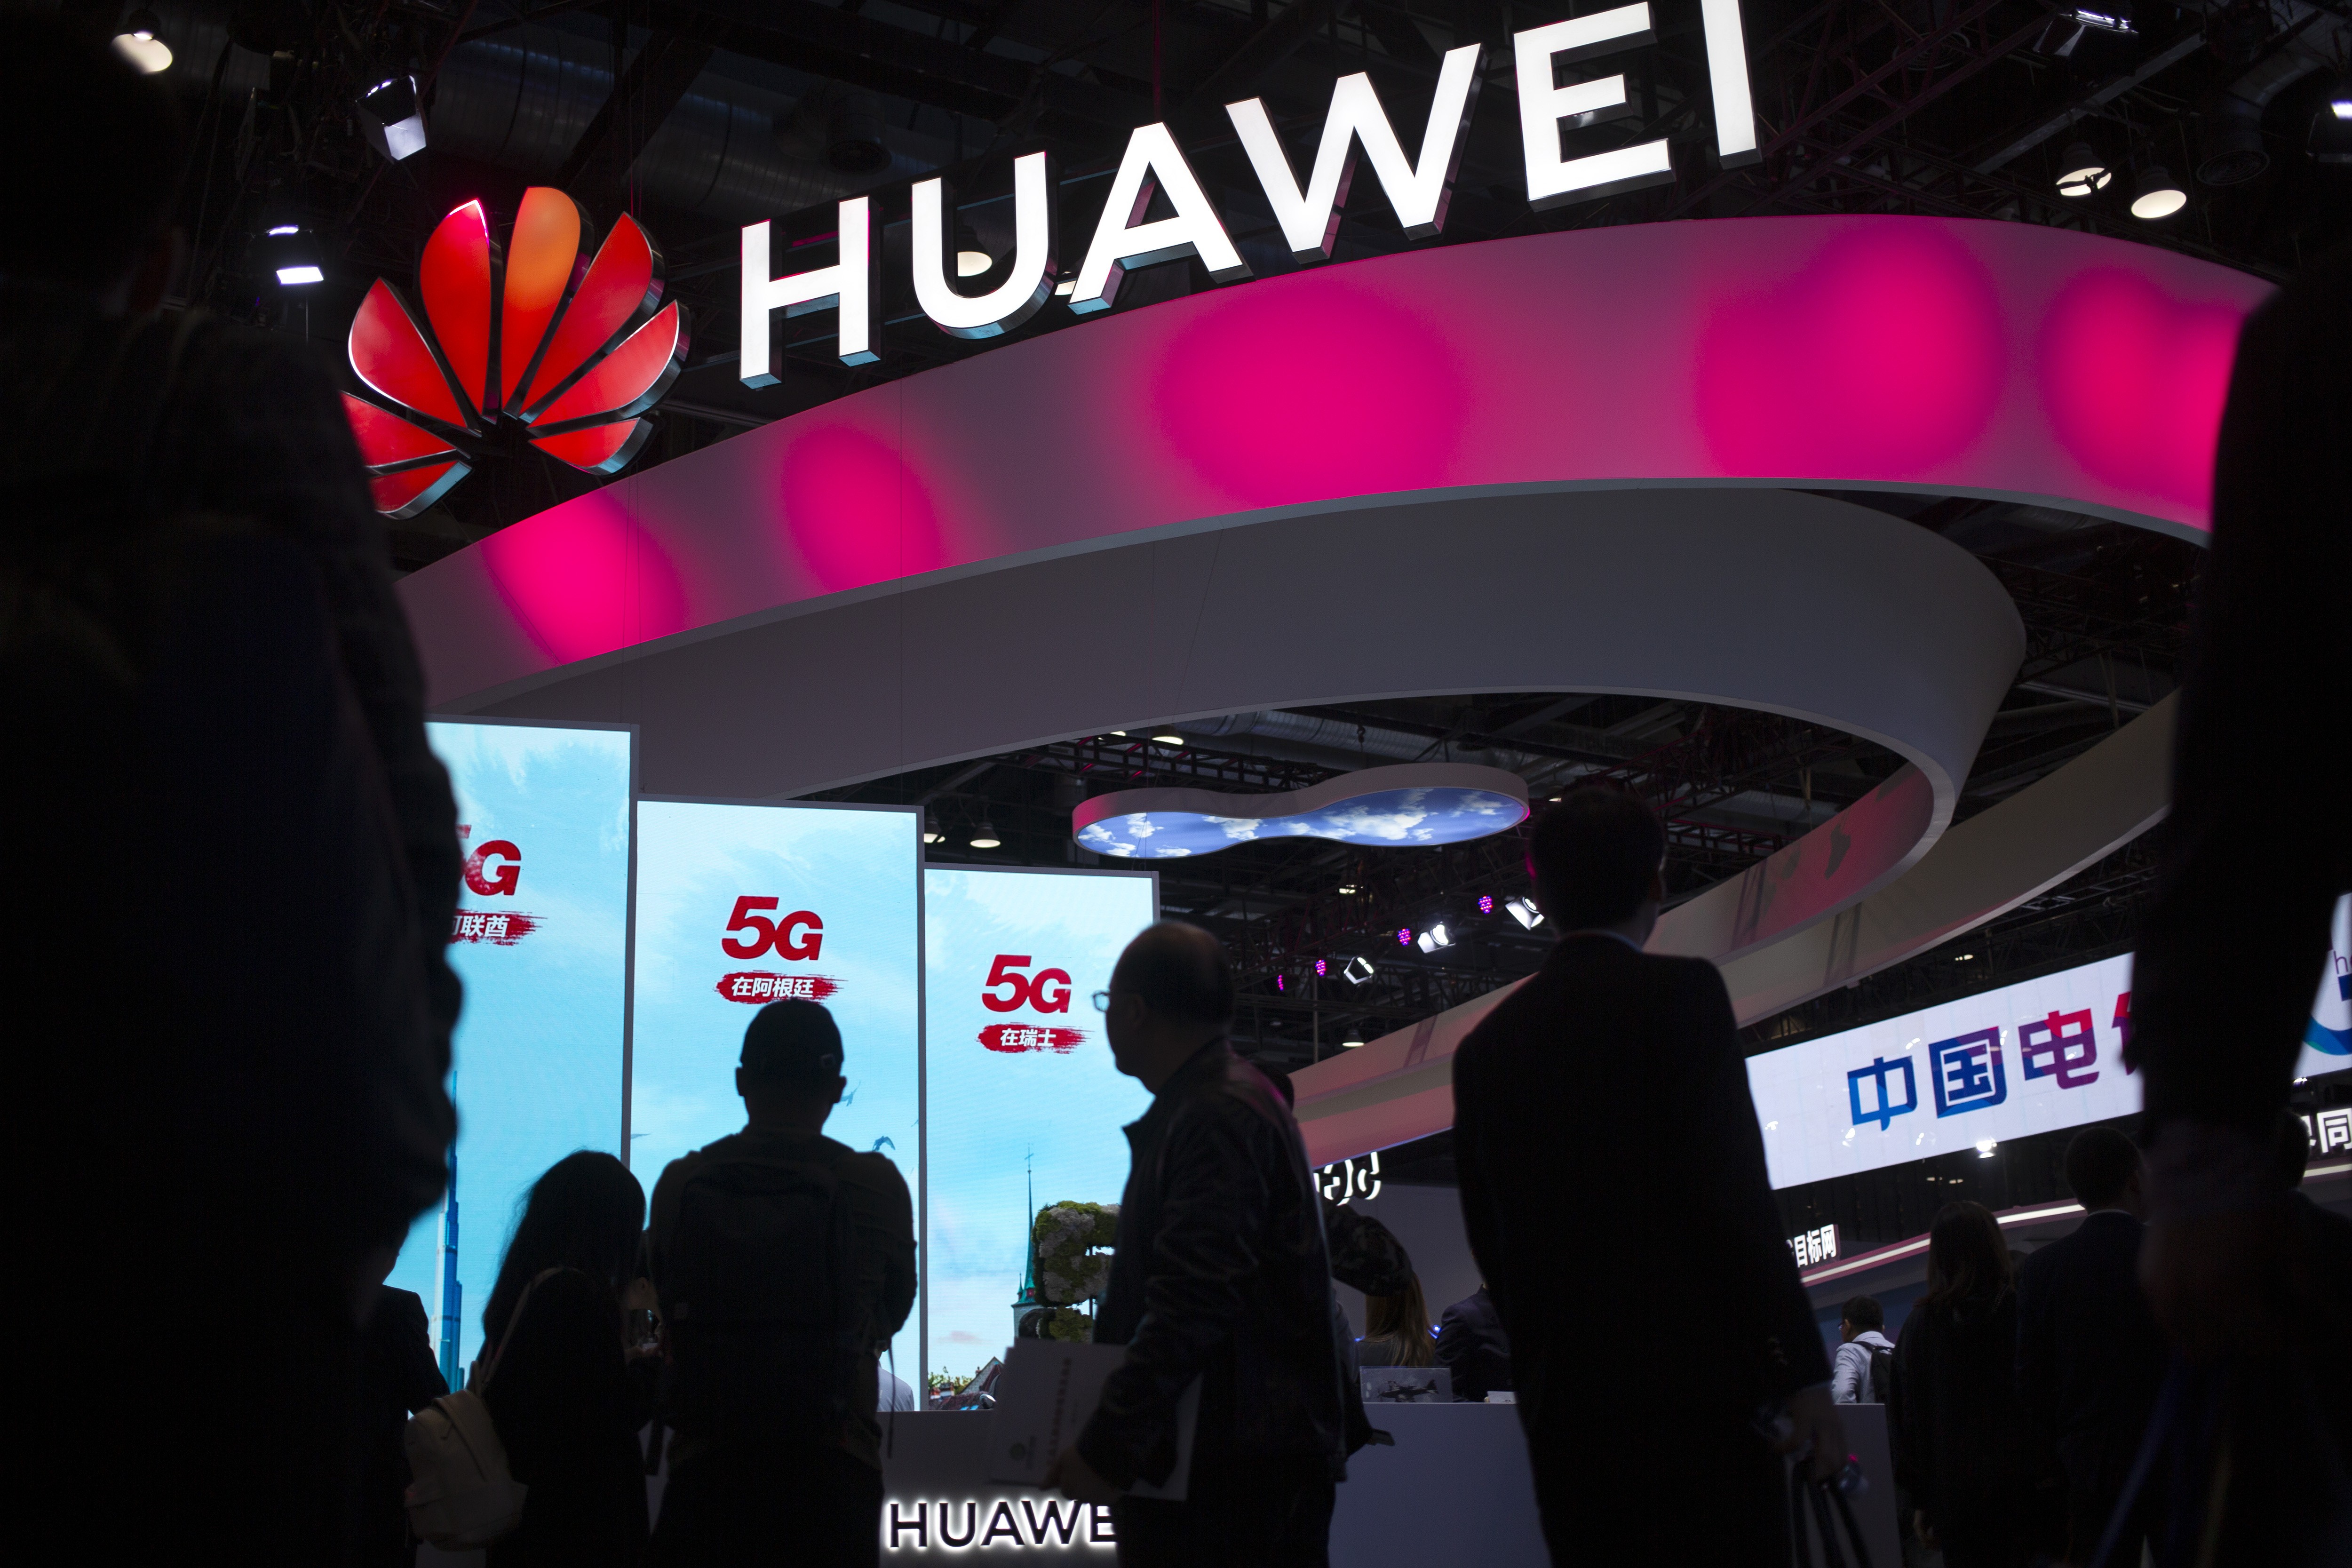 Attendees walk past a display for 5G services from Chinese telecoms firm Huawei at the PT Expo in Beijing. Photo: AP